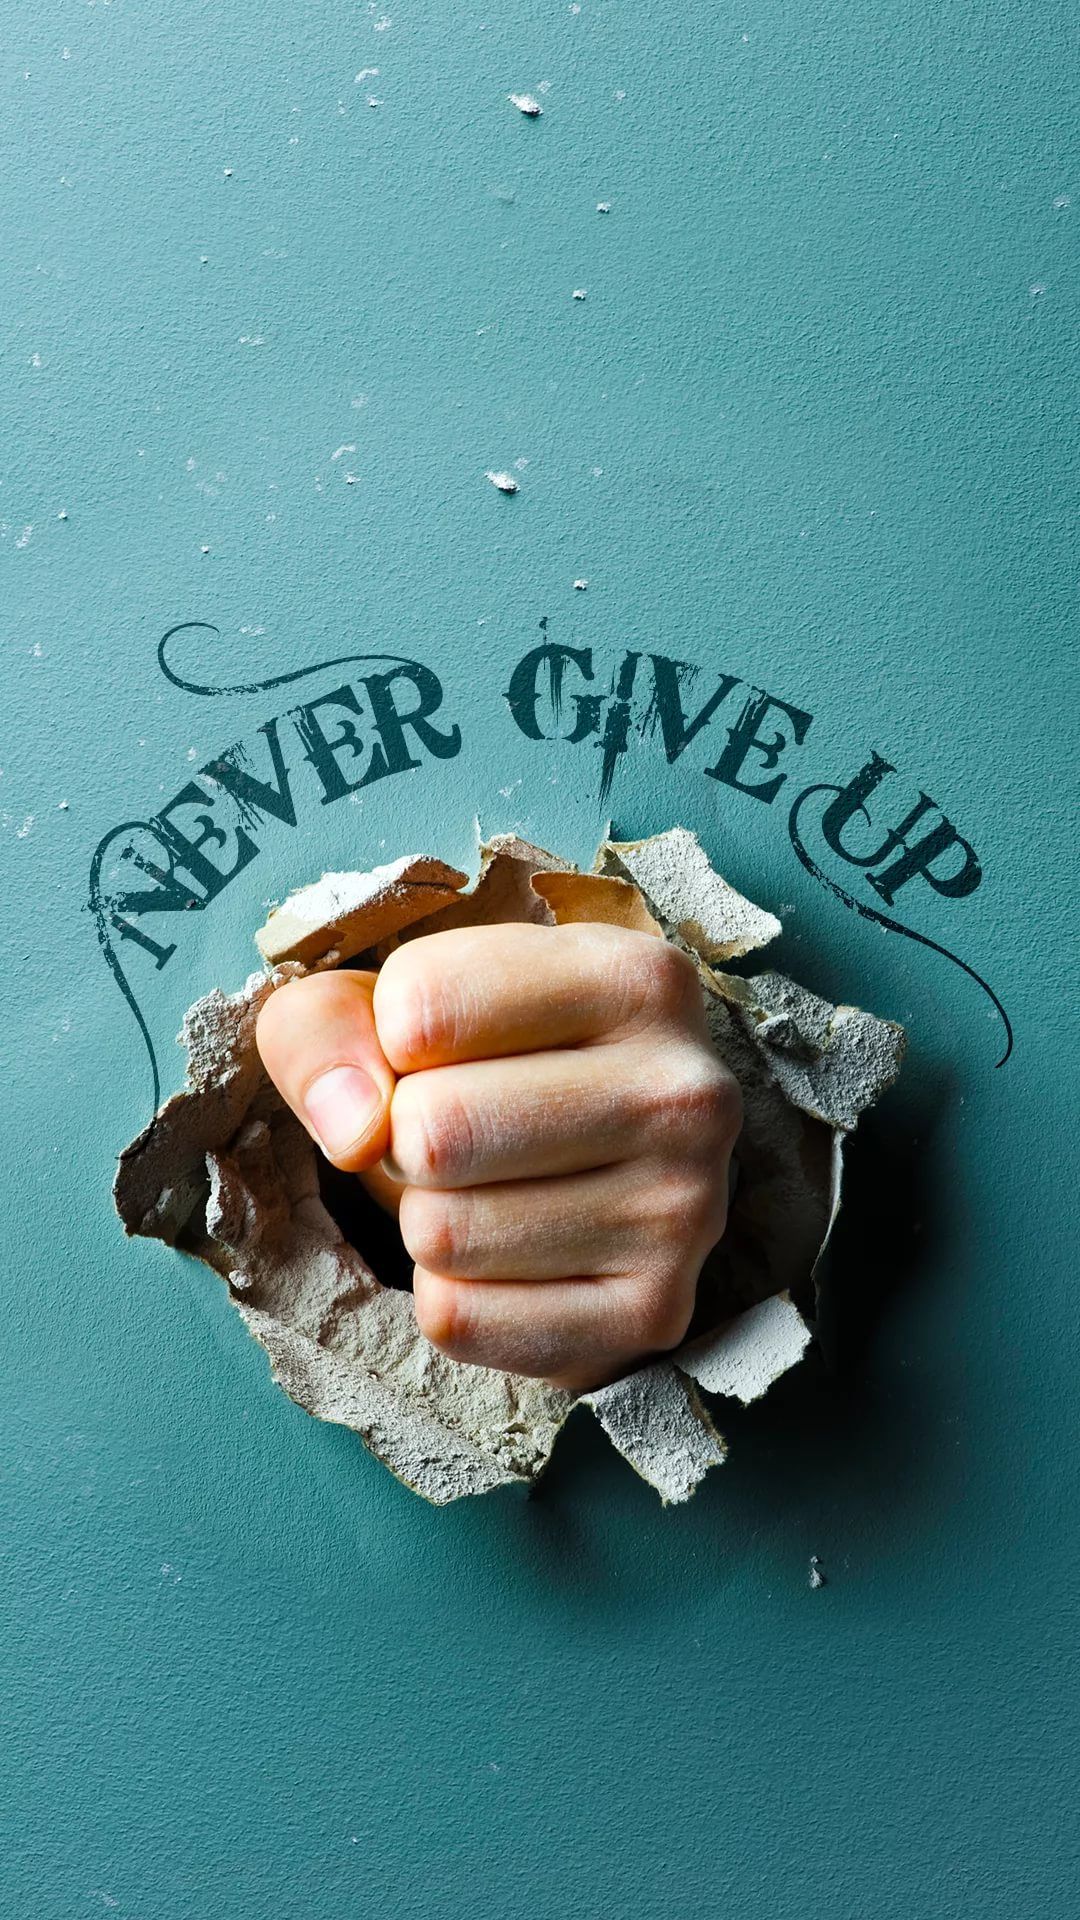 Never Give Up iPhone Wallpaper